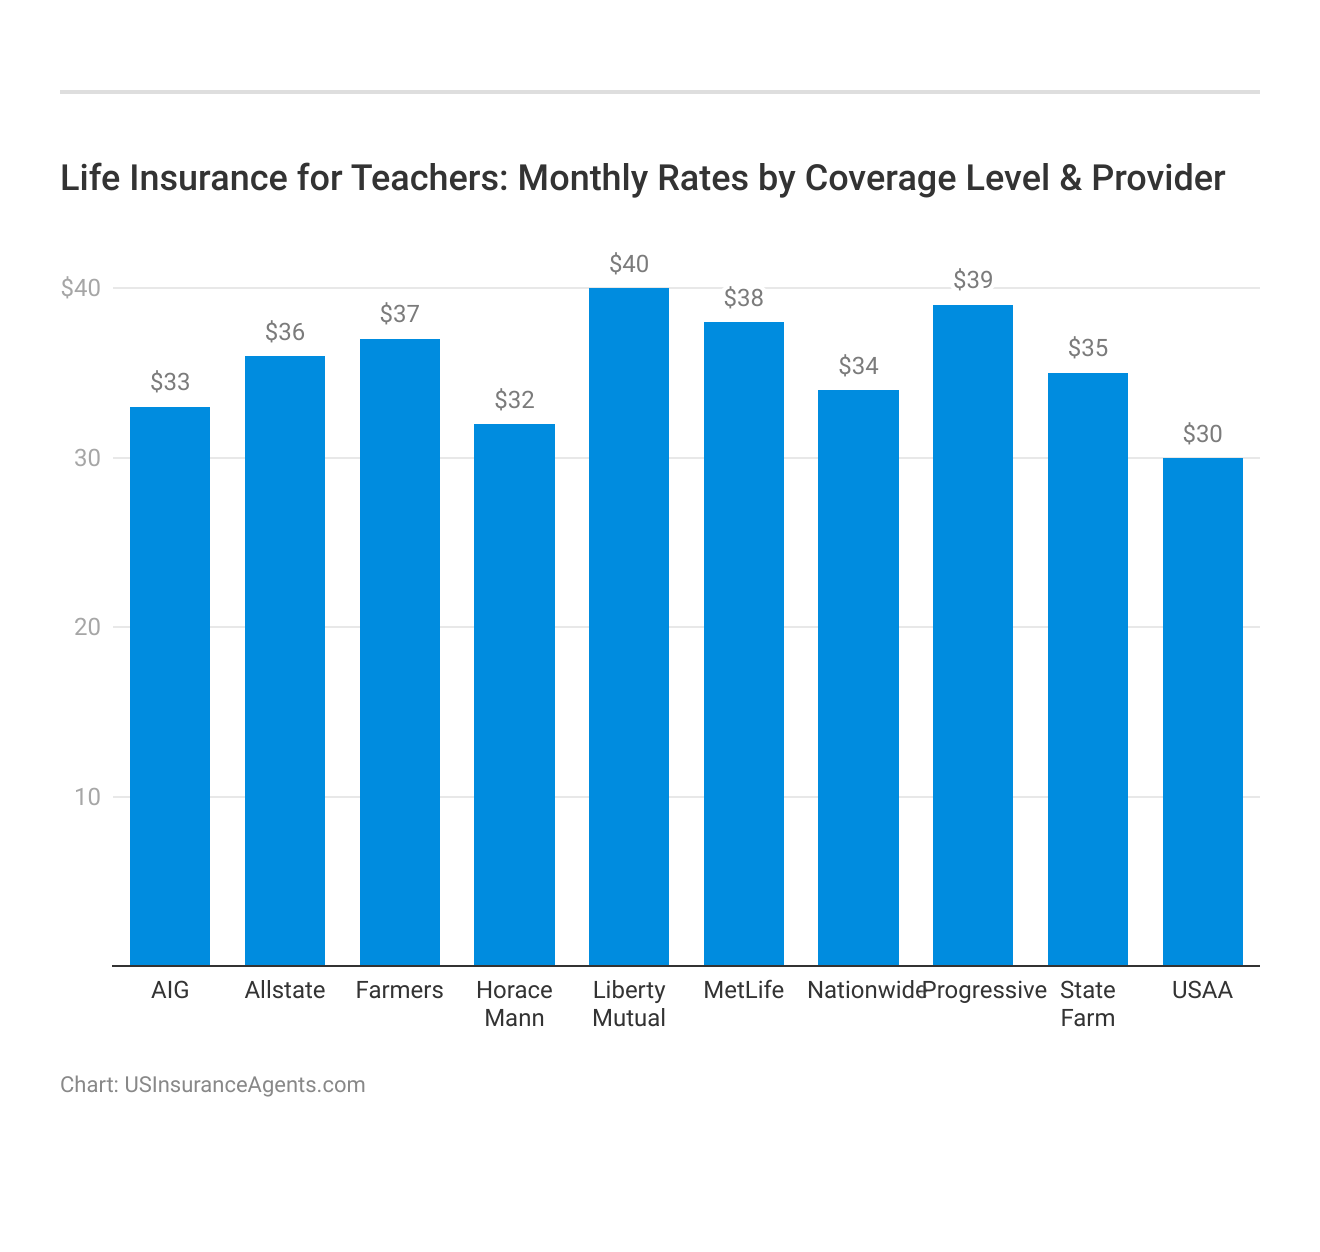 <h3>Life Insurance for Teachers: Monthly Rates by Coverage Level & Provider</h3>